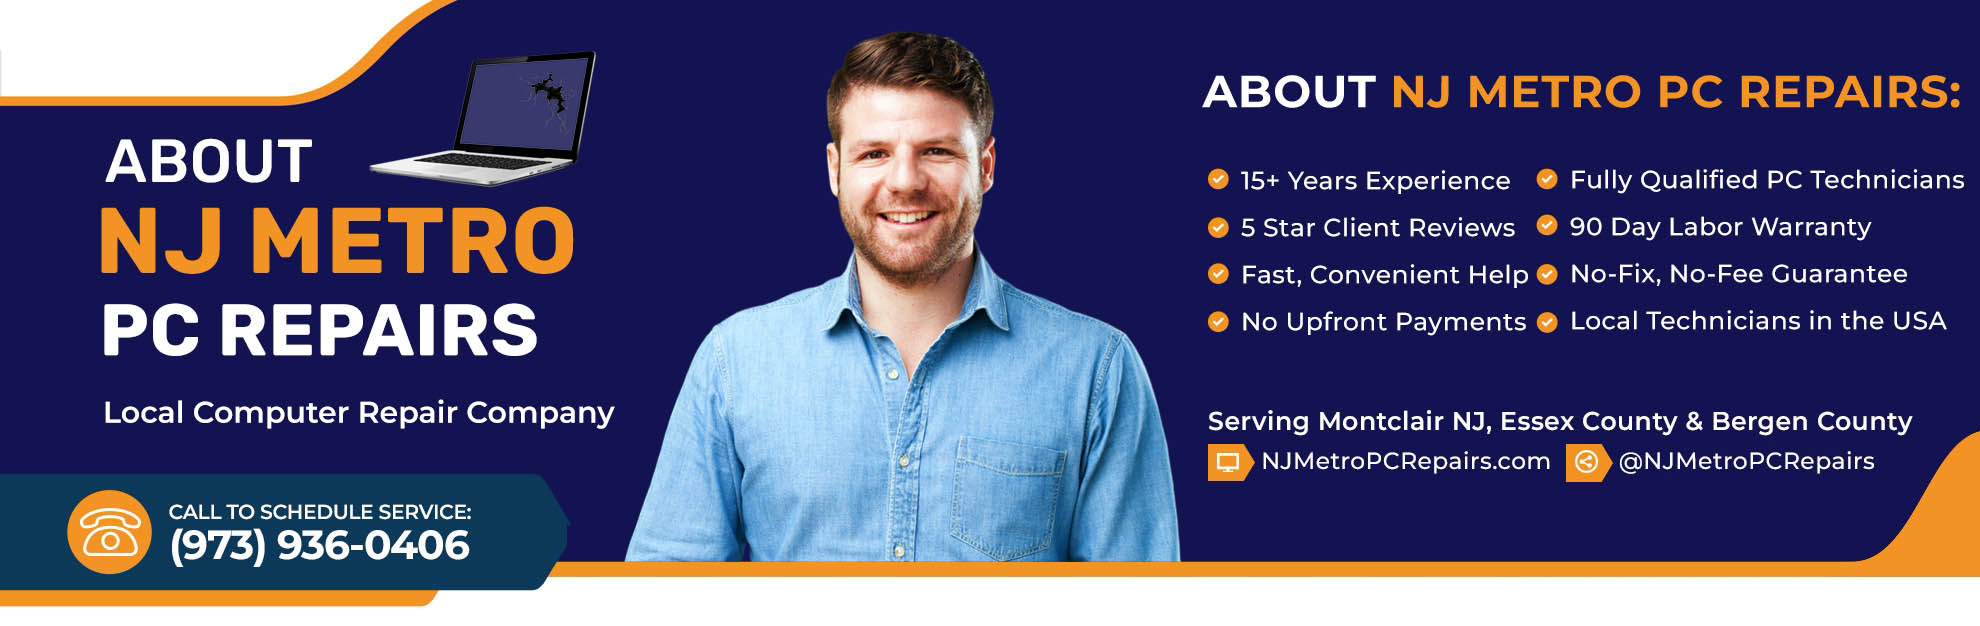 Banner Image with Confident Smiling Computer Repair Technician and A List Of Computer Repair Credentials